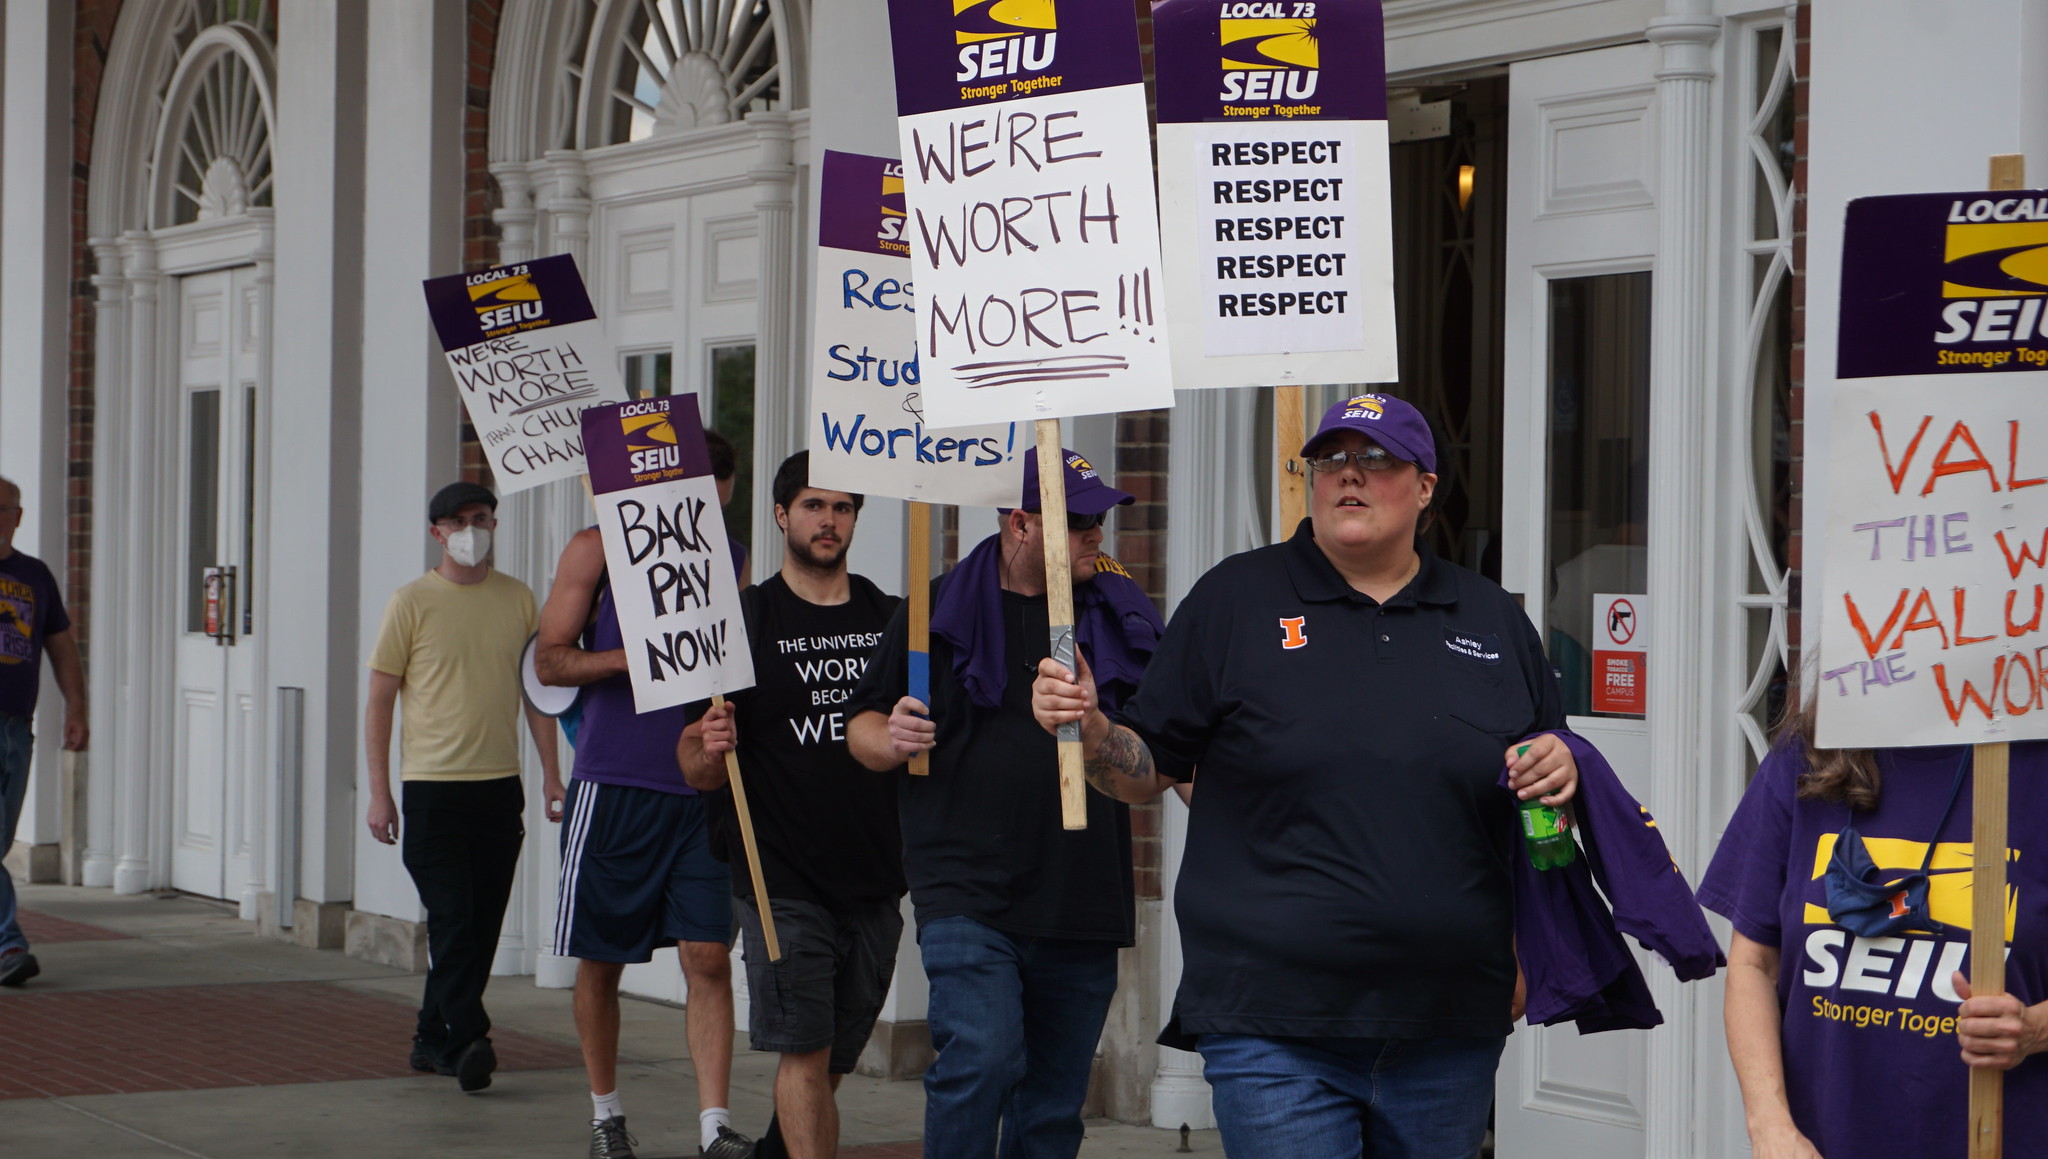 SEIU Local 73 Bargaining Committee Reaches Tentative Agreement With